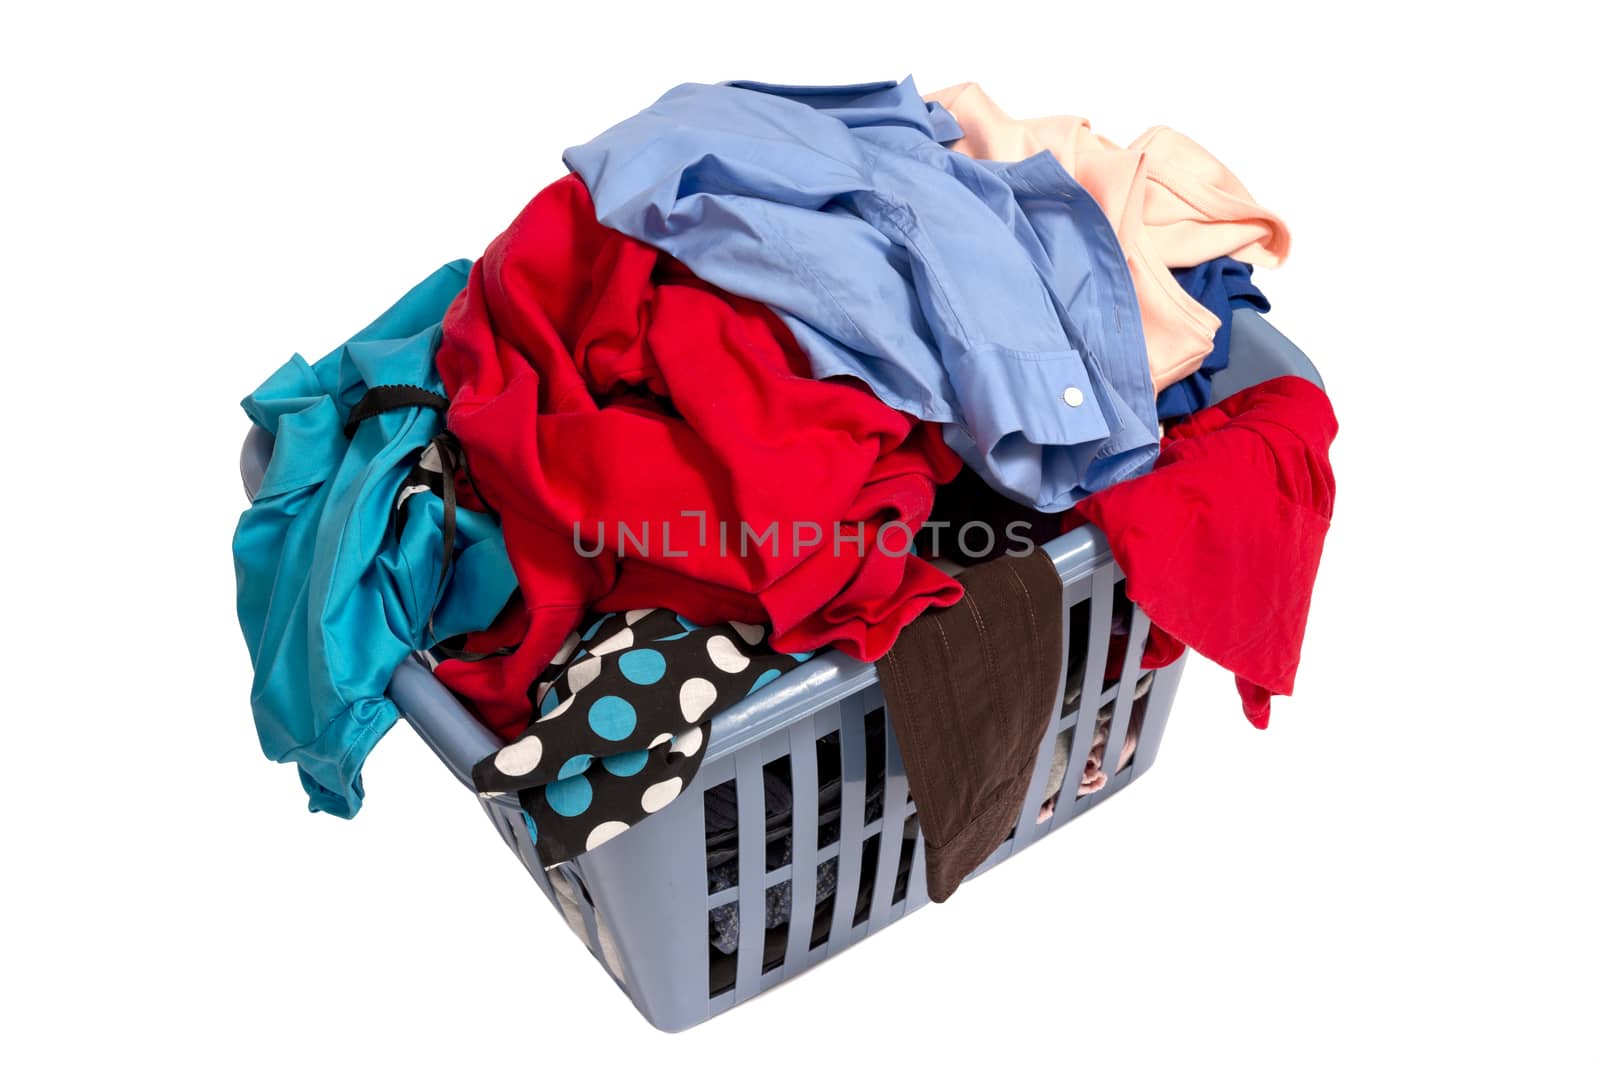 Horizontal shot of a pile of dirty laundry in a large laundry basket. Isolated on white.